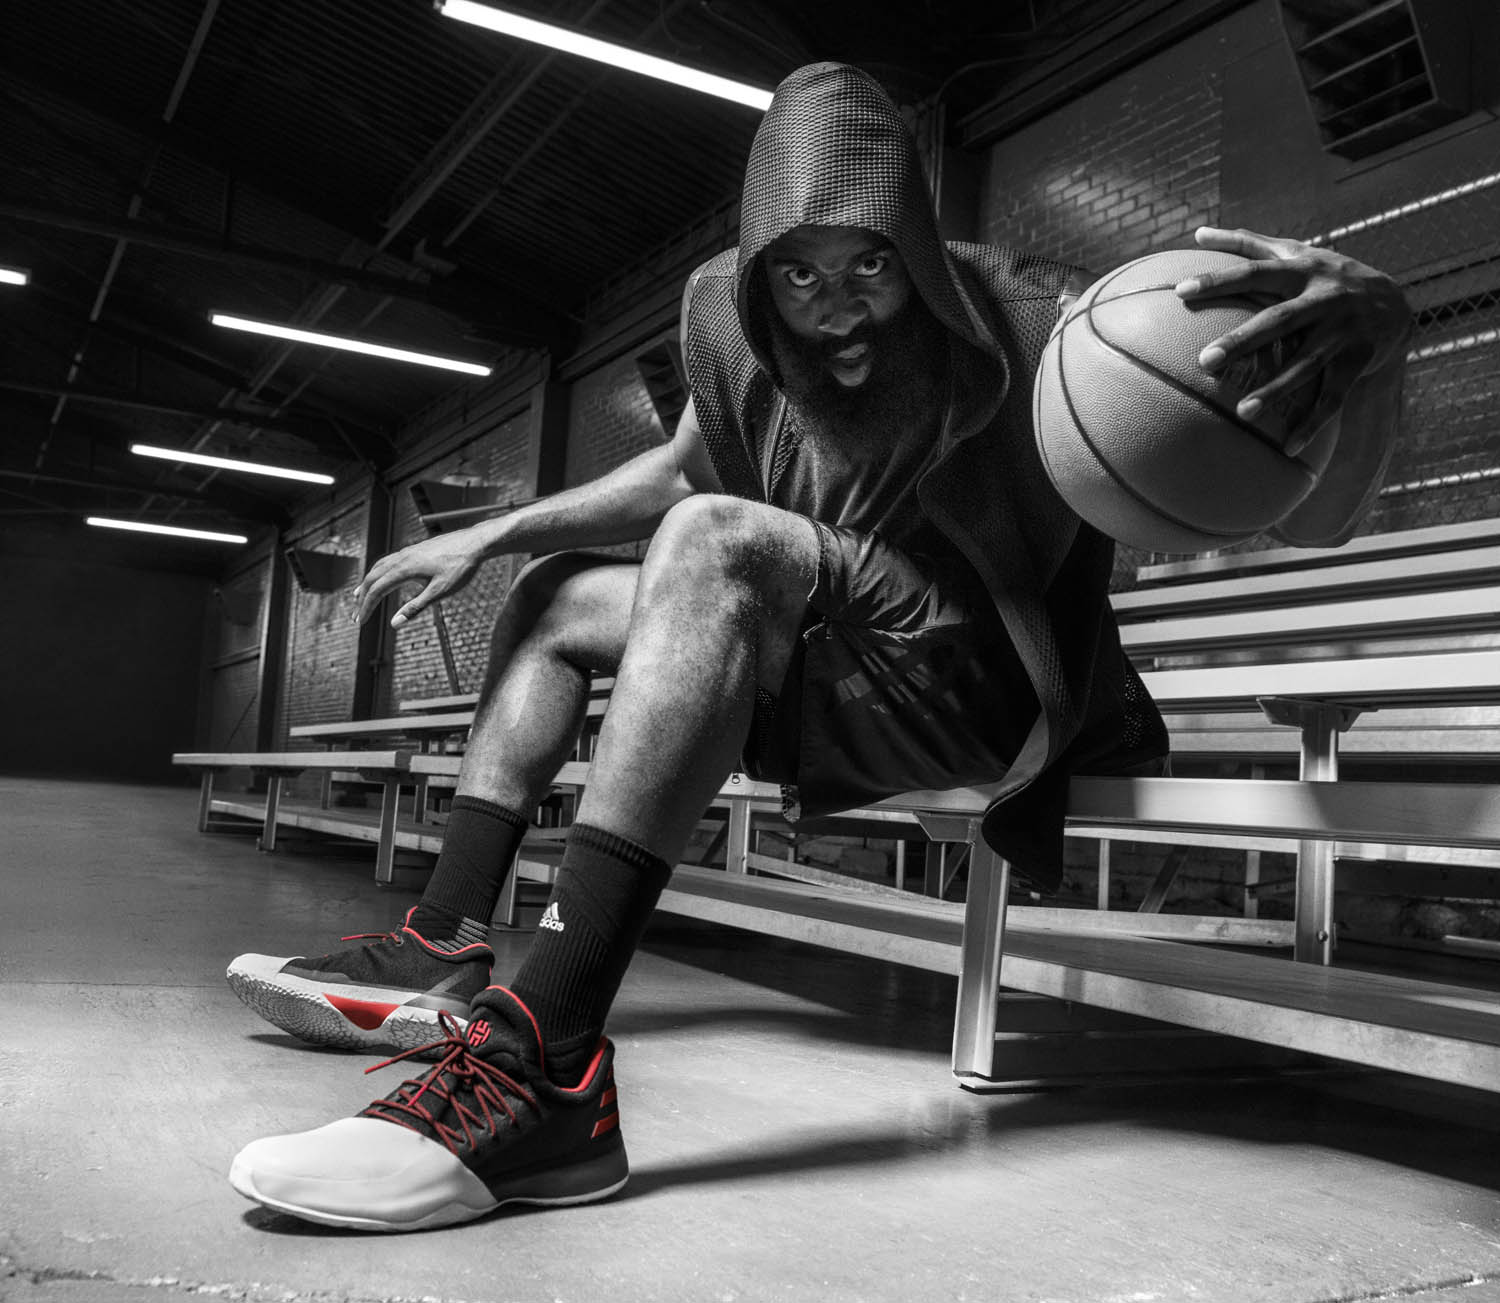 Rockets' Harden ready to put his brand on new shoe deal